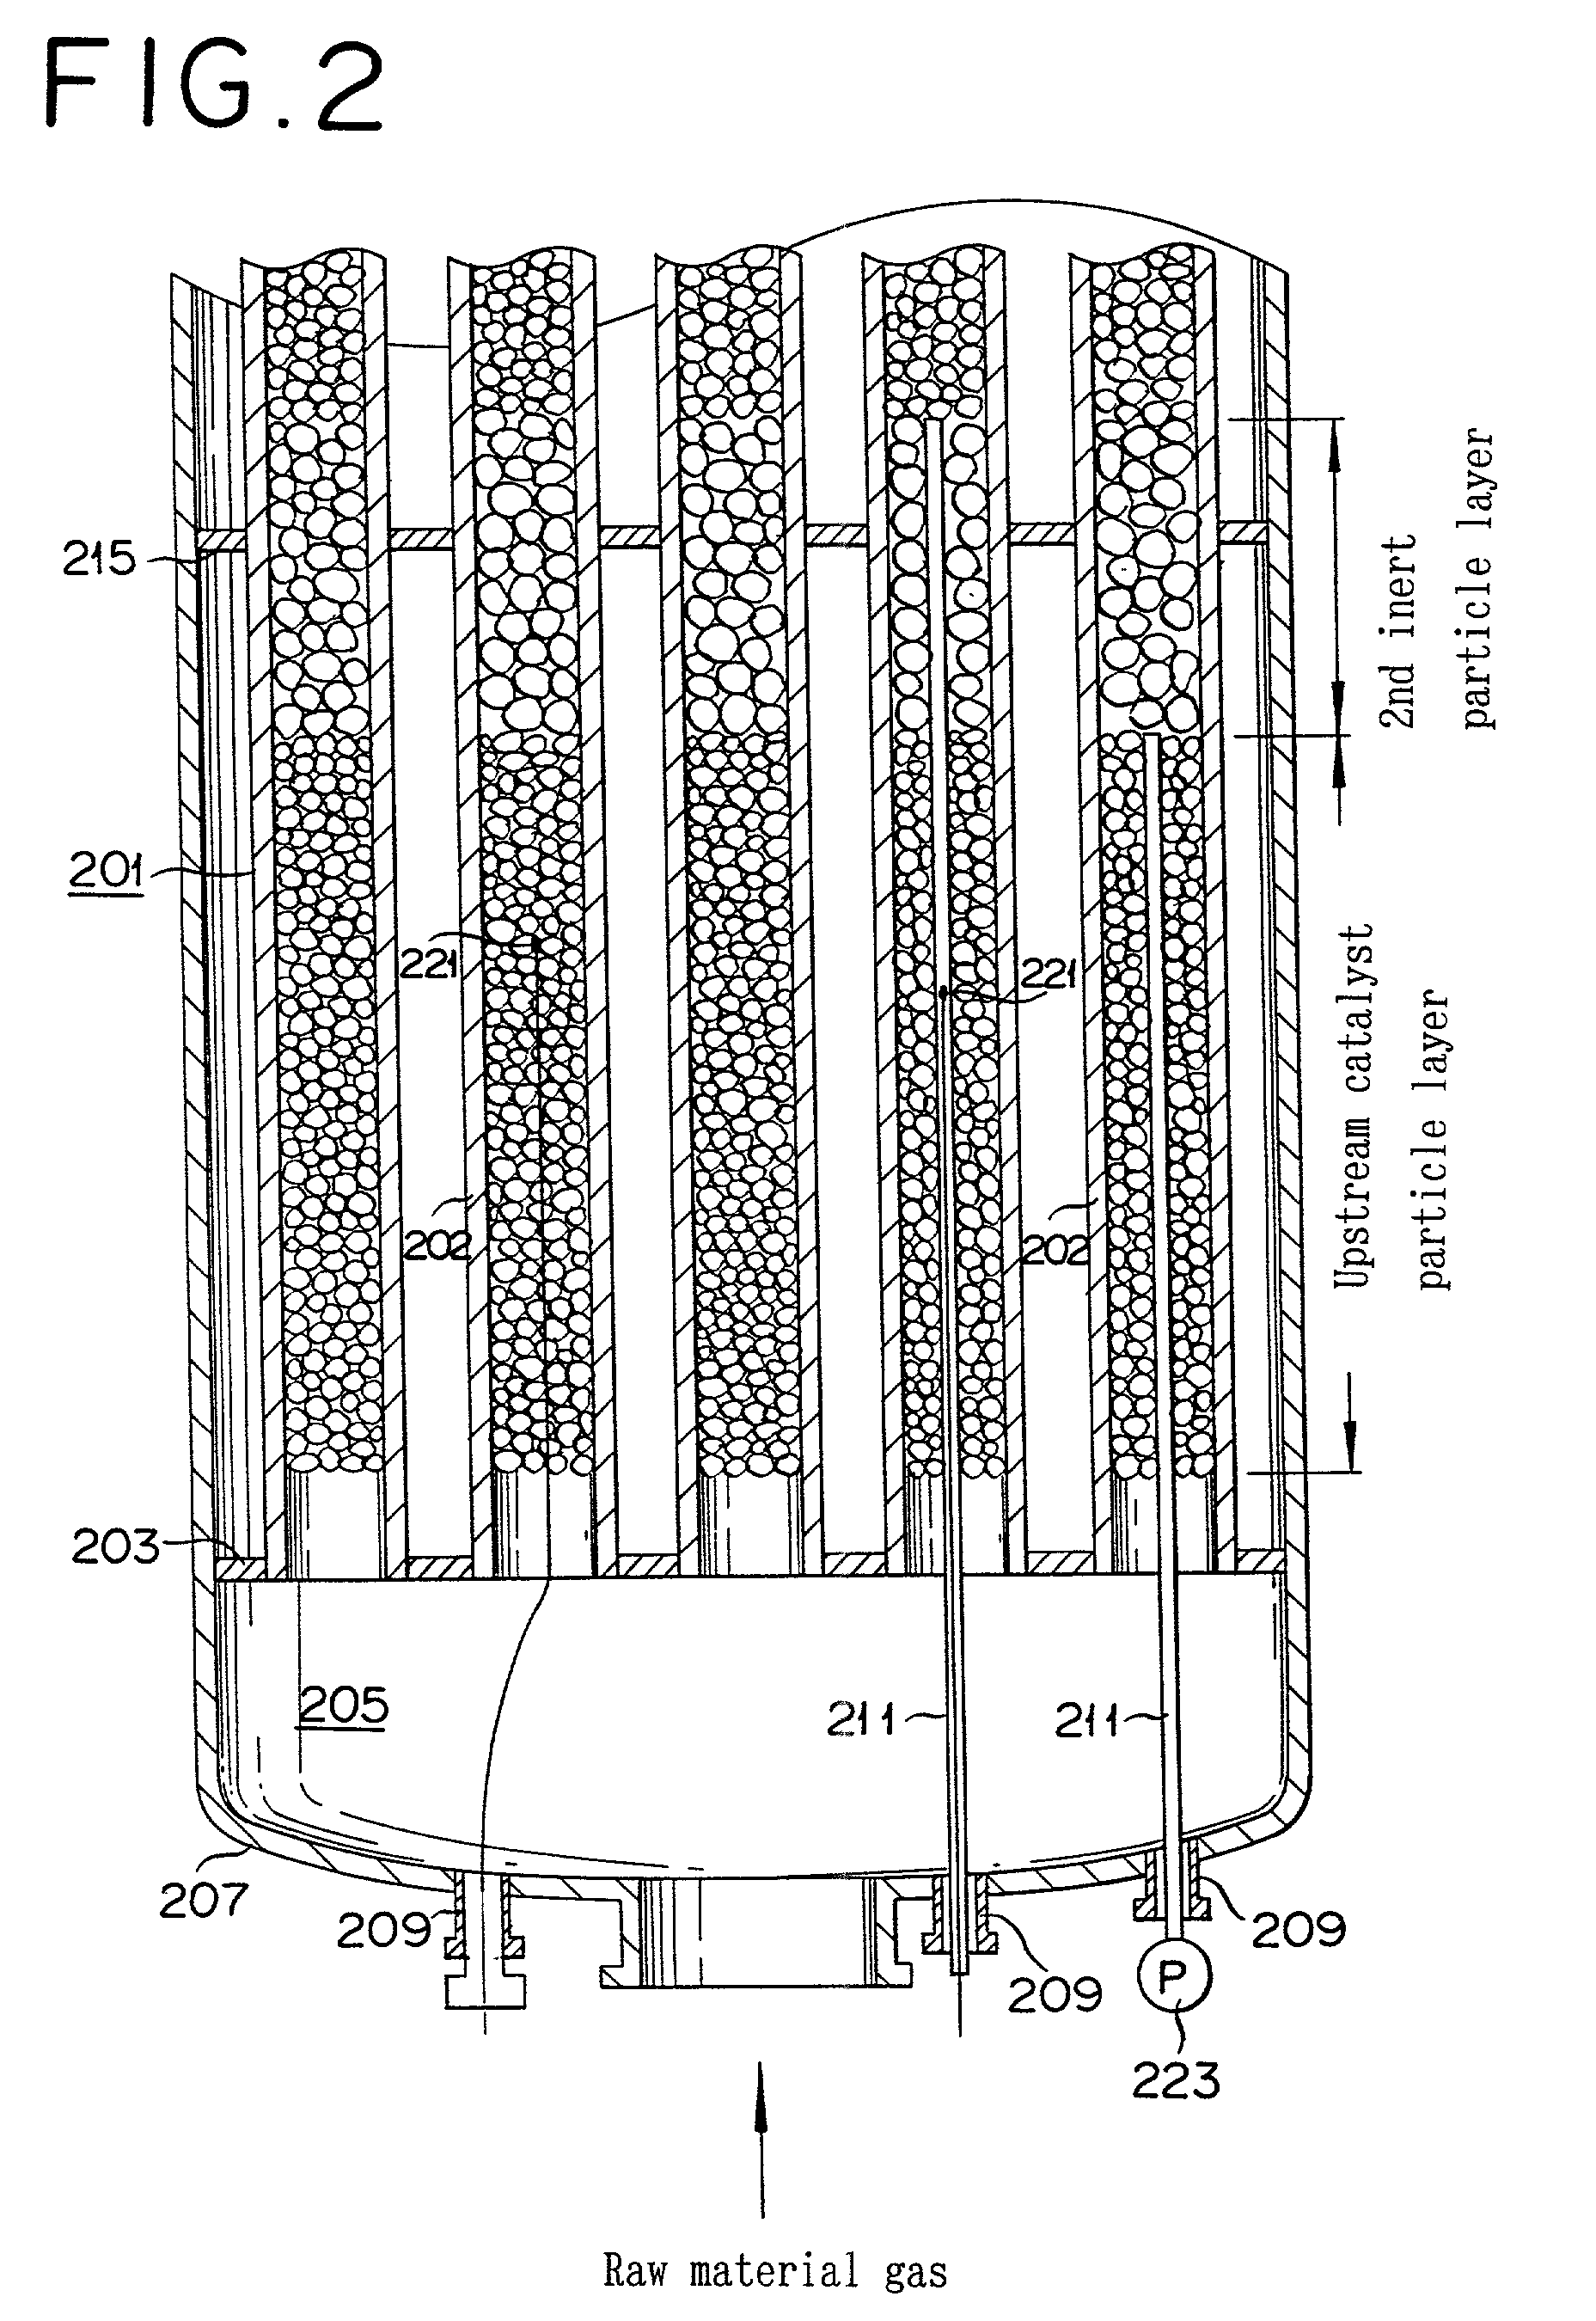 Reactor filled with solid particle and gas-phase catalytic oxidation with the reactor